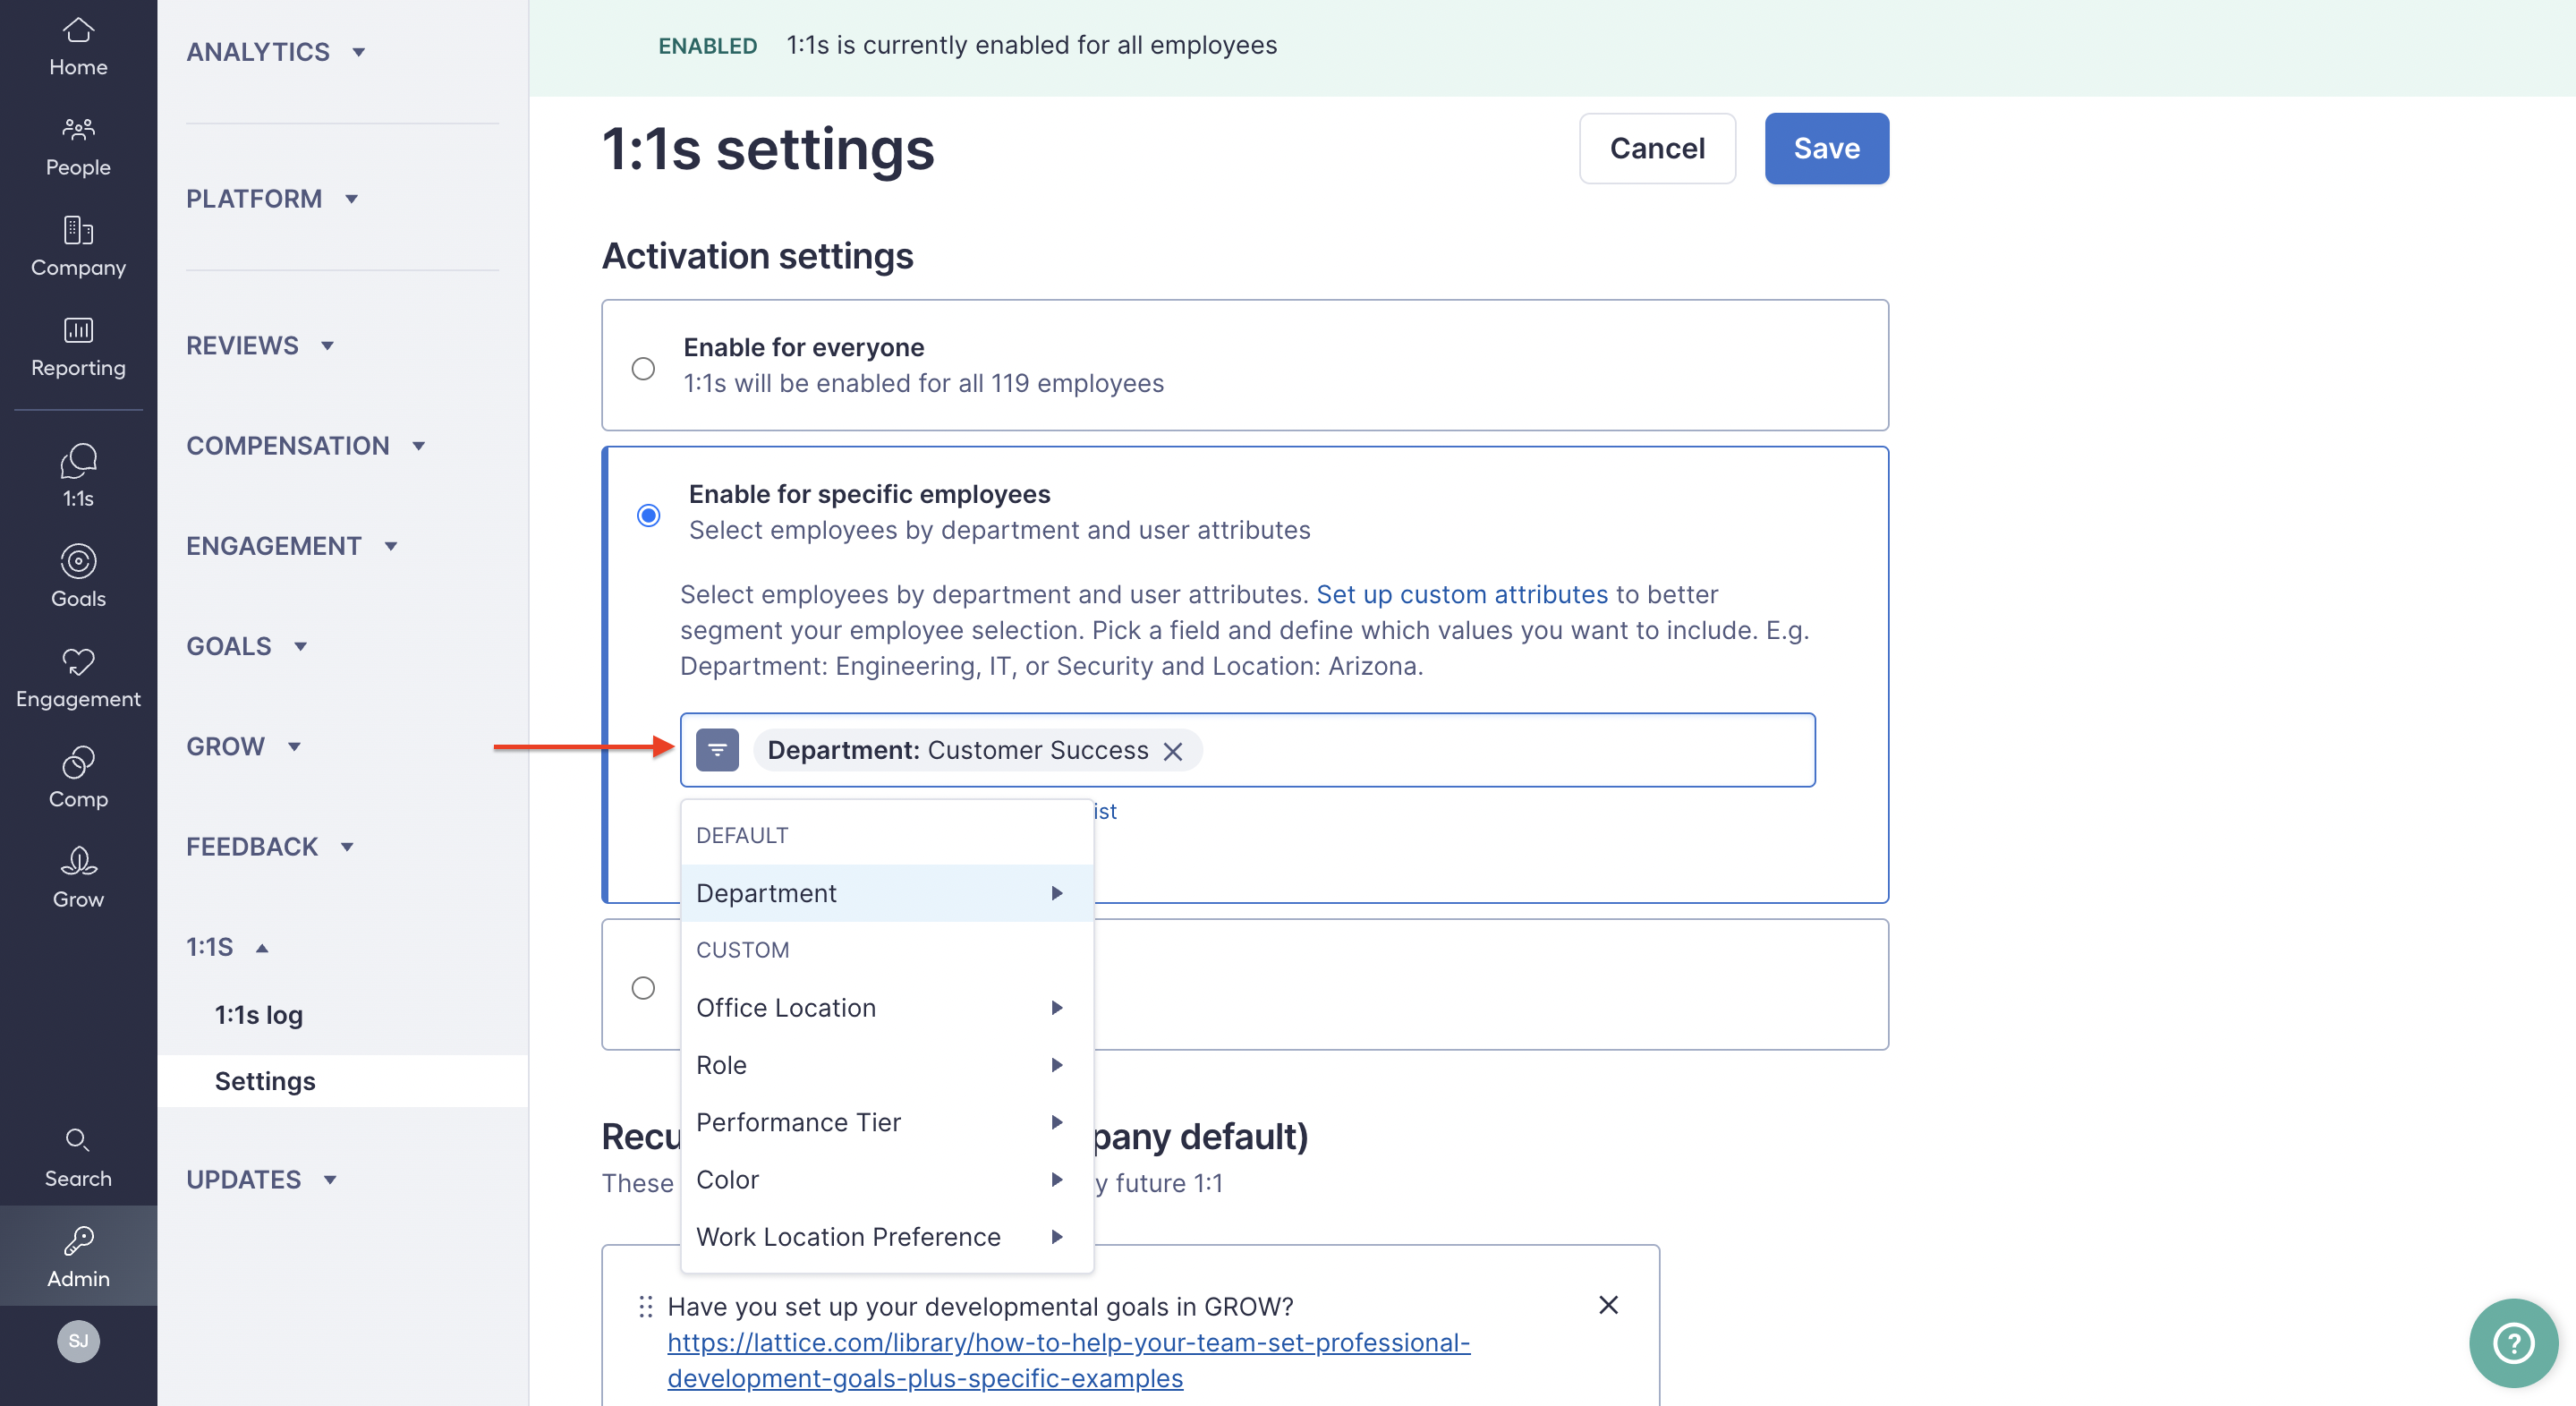 Image of activation settings where an arrow highlights the filter dropdown for enabling for specific employees